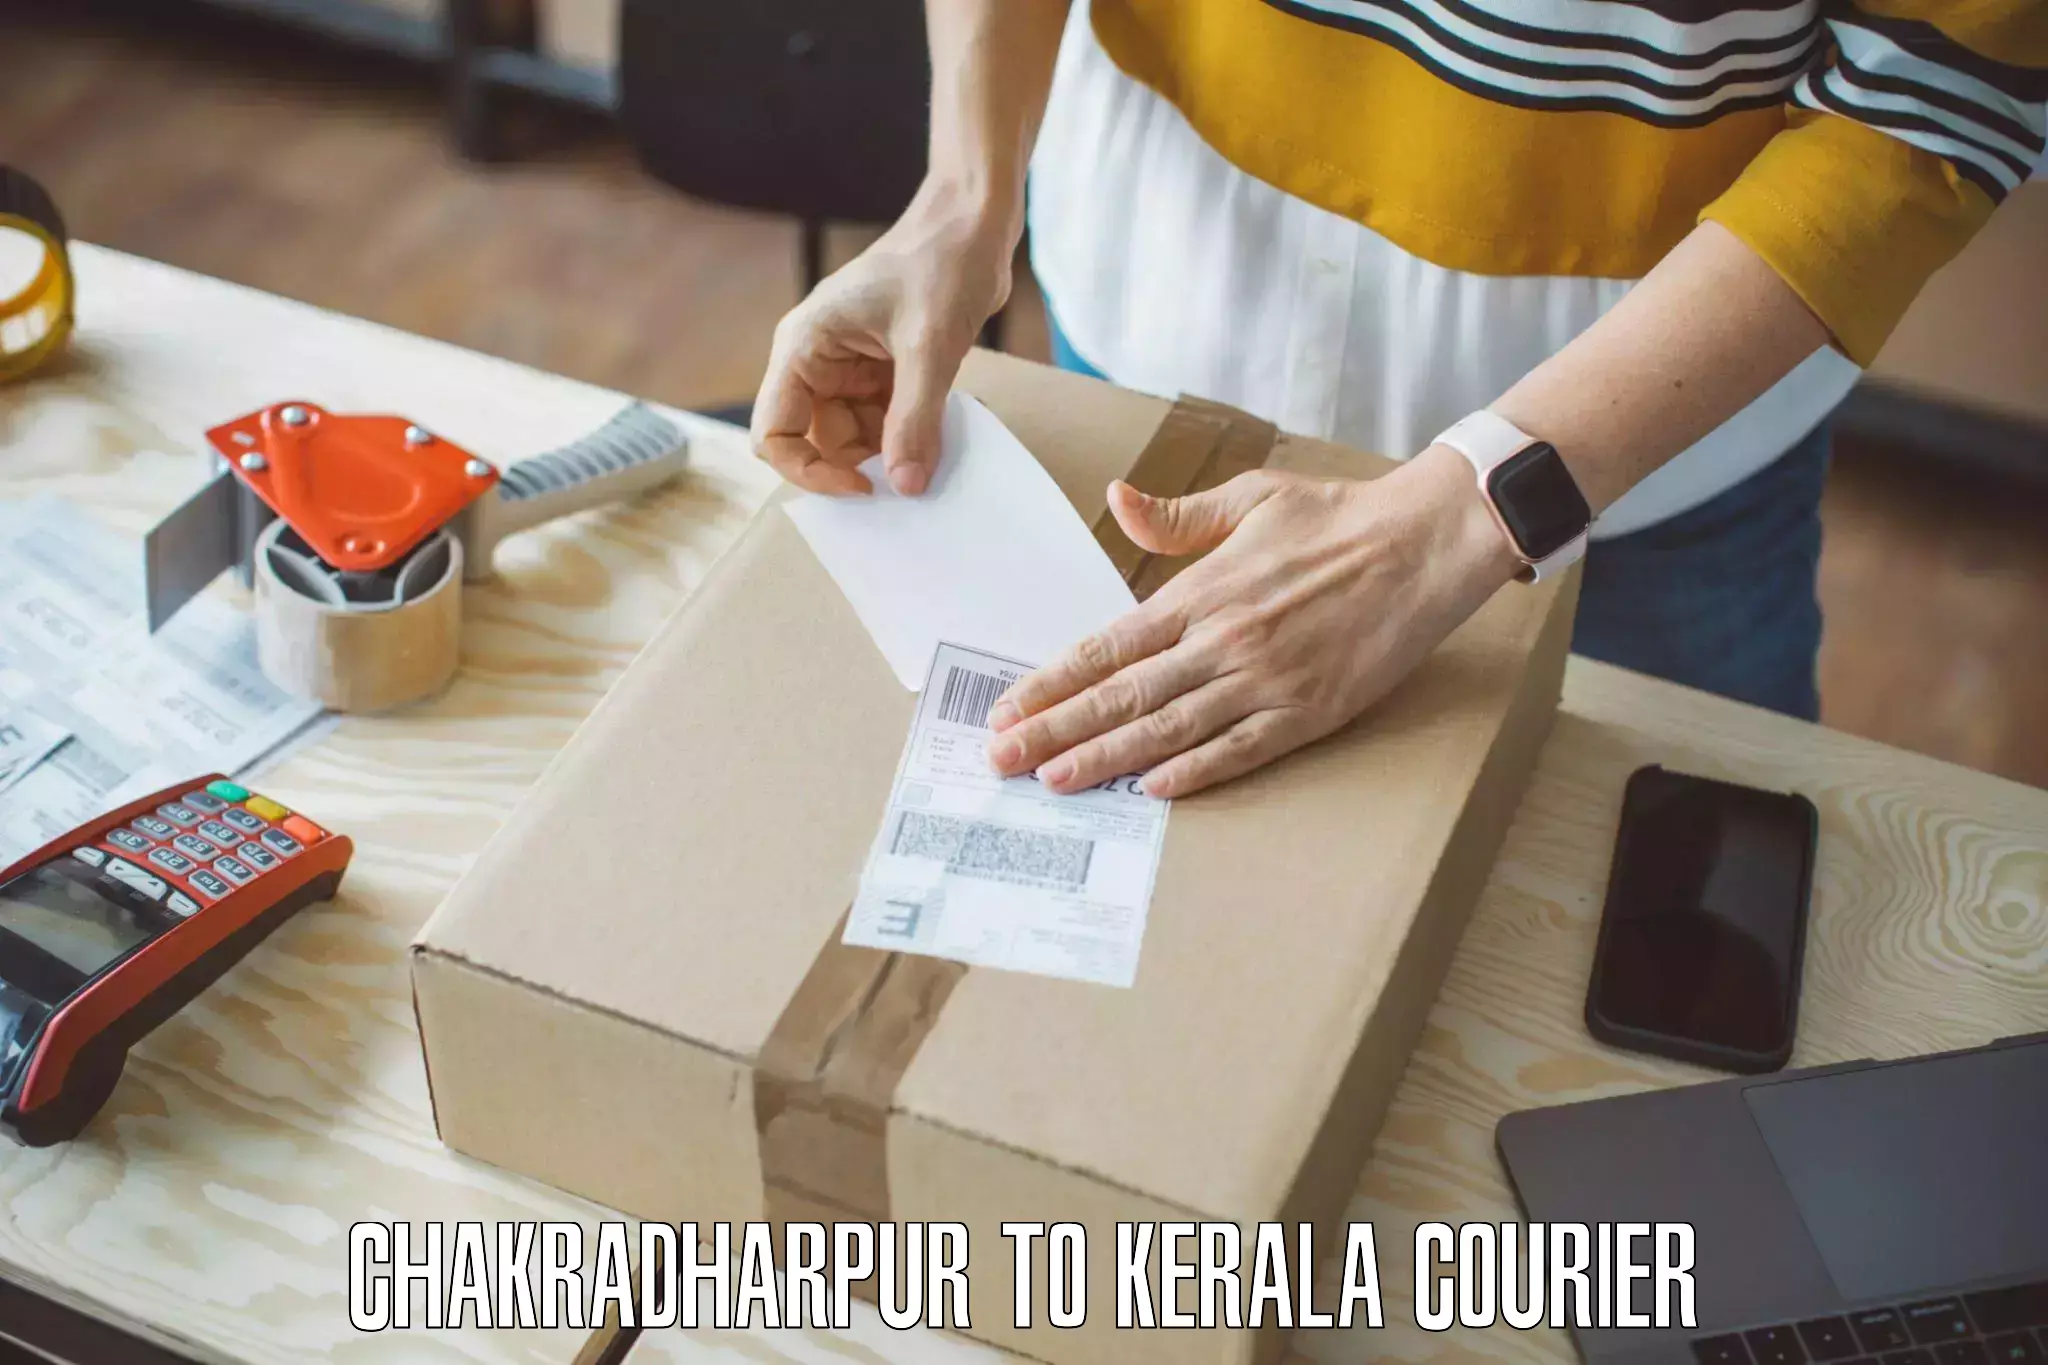 Professional furniture movers in Chakradharpur to Calicut